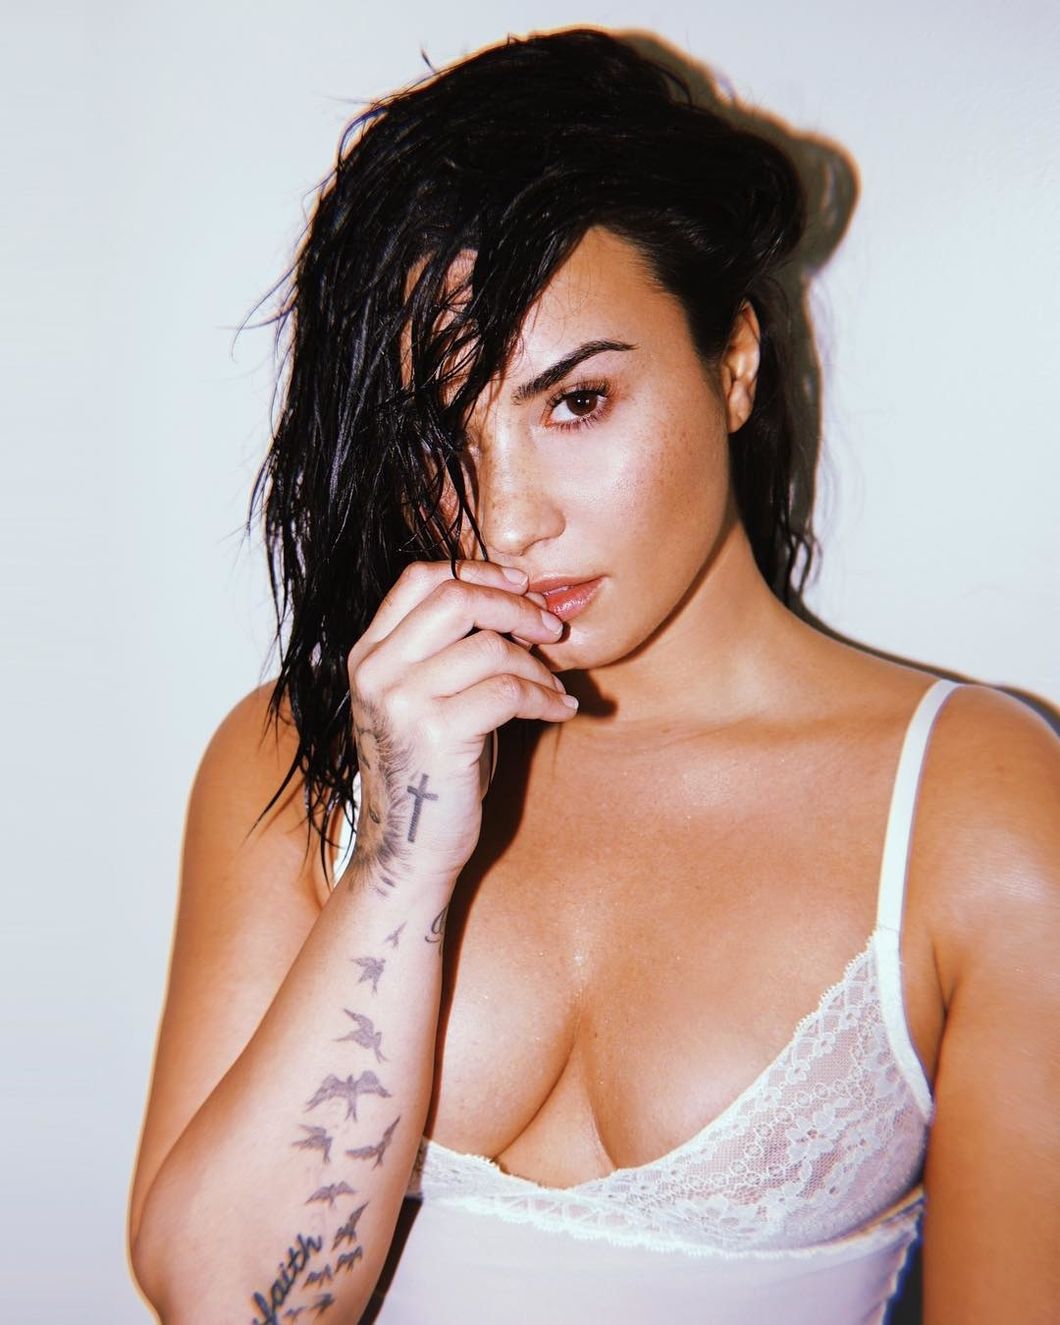 Demi Lovato Isn't Sober Anymore, But That Doesn't Make Me Love Her Any Less